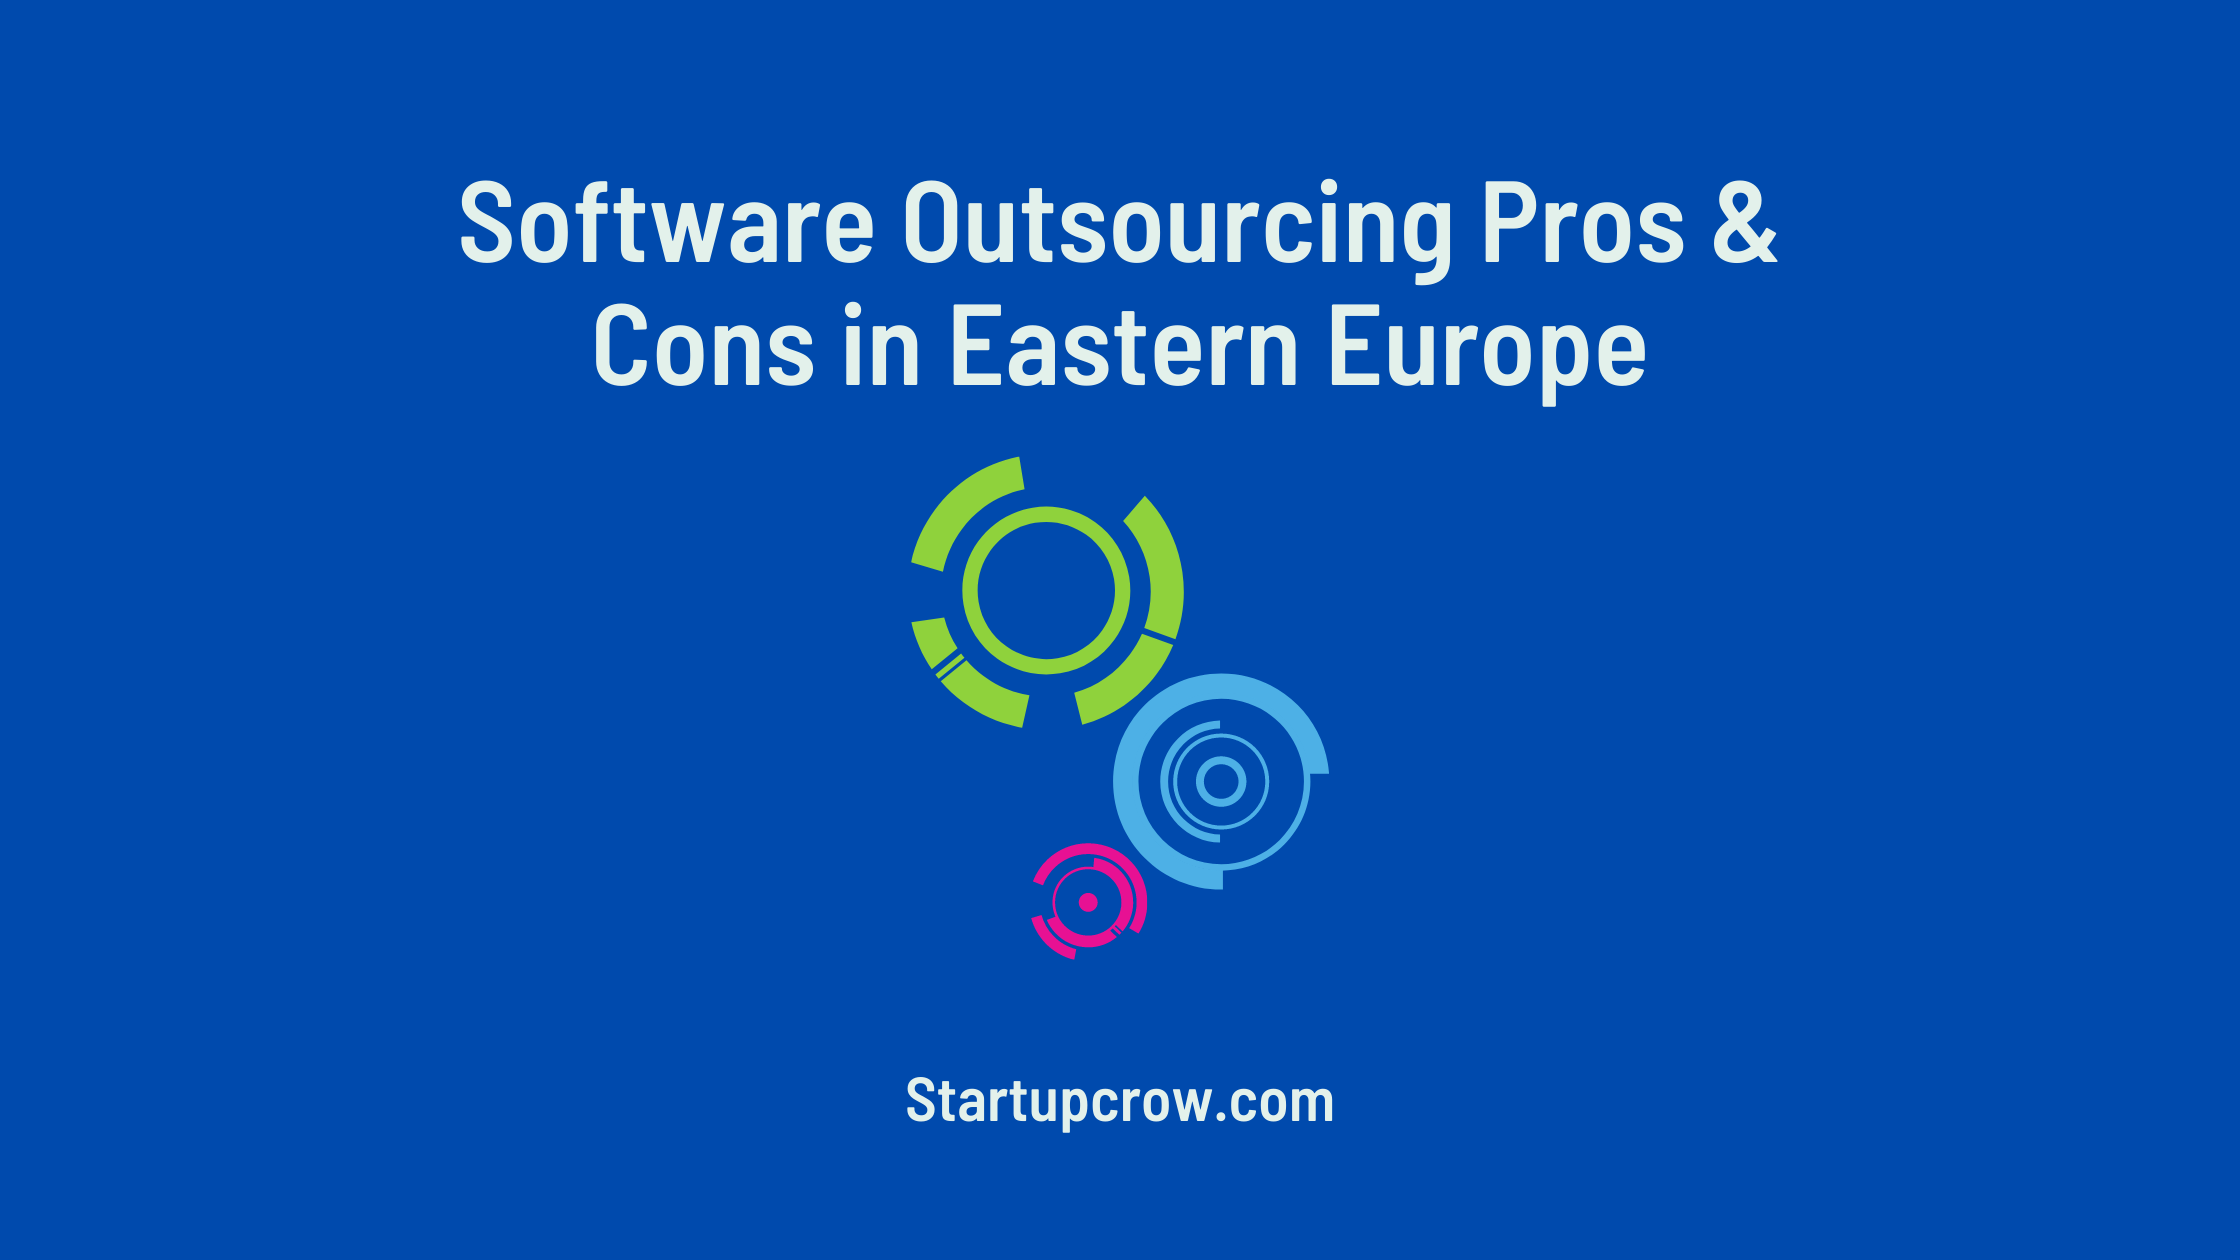 Software Outsourcing Pros & Cons in Eastern Europe